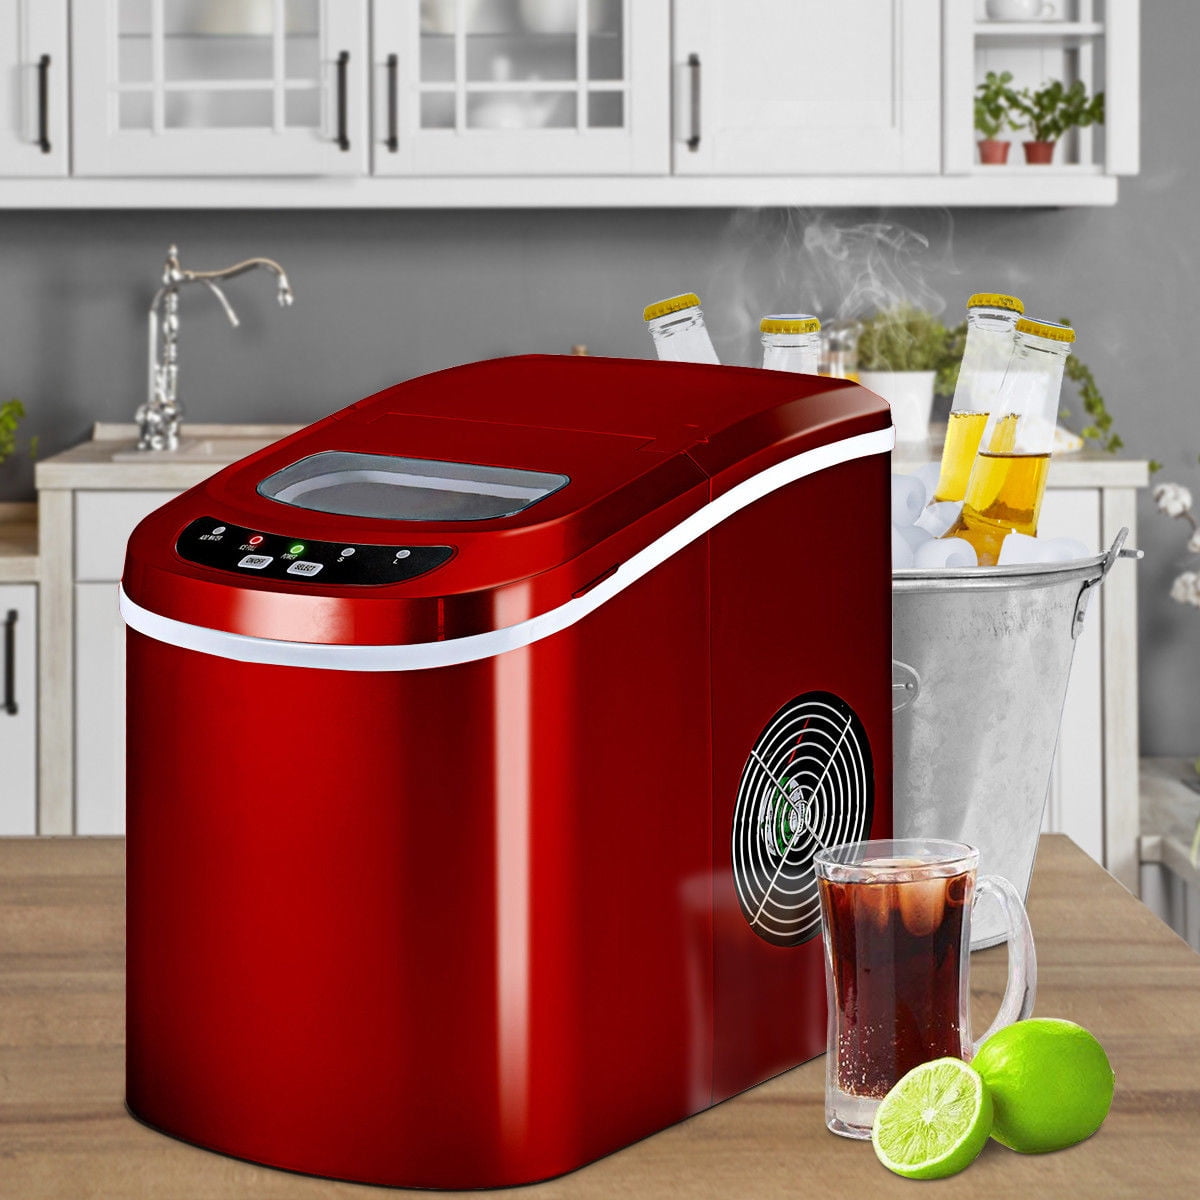 Costway Red Portable Compact Electric Ice Maker Machine Mini Cube 26lb/Day - 2